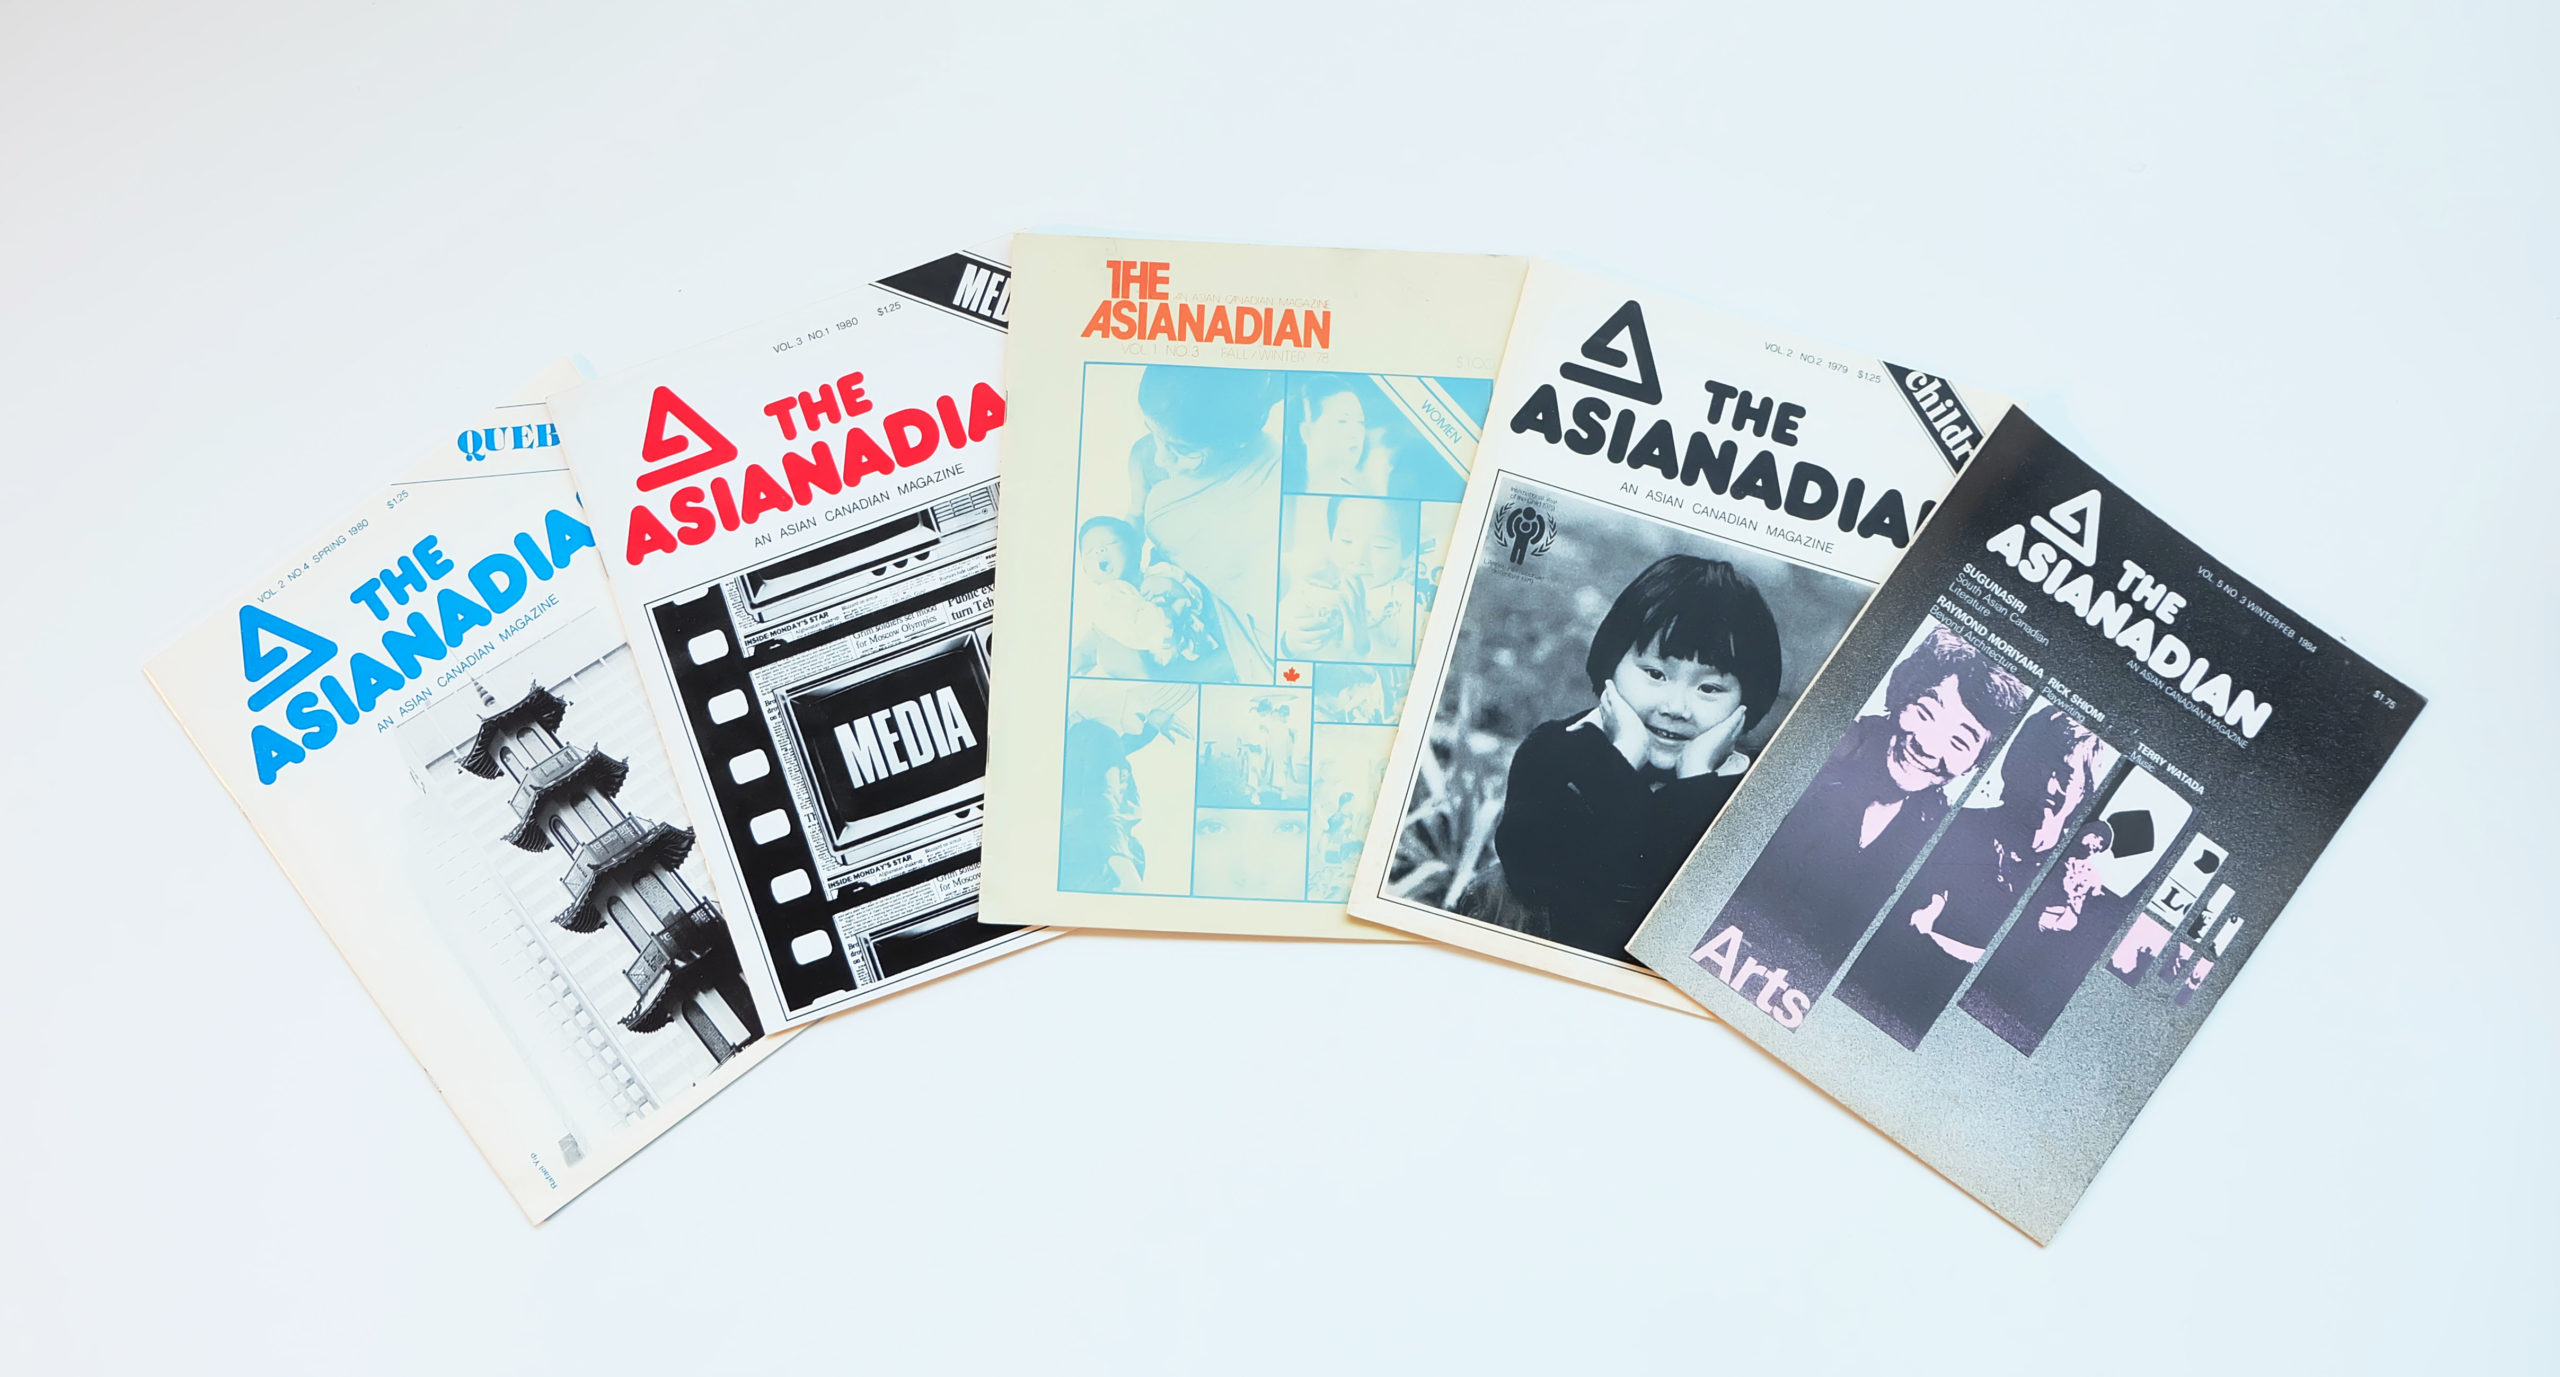 Fanned out covers of old Asianadian magazines